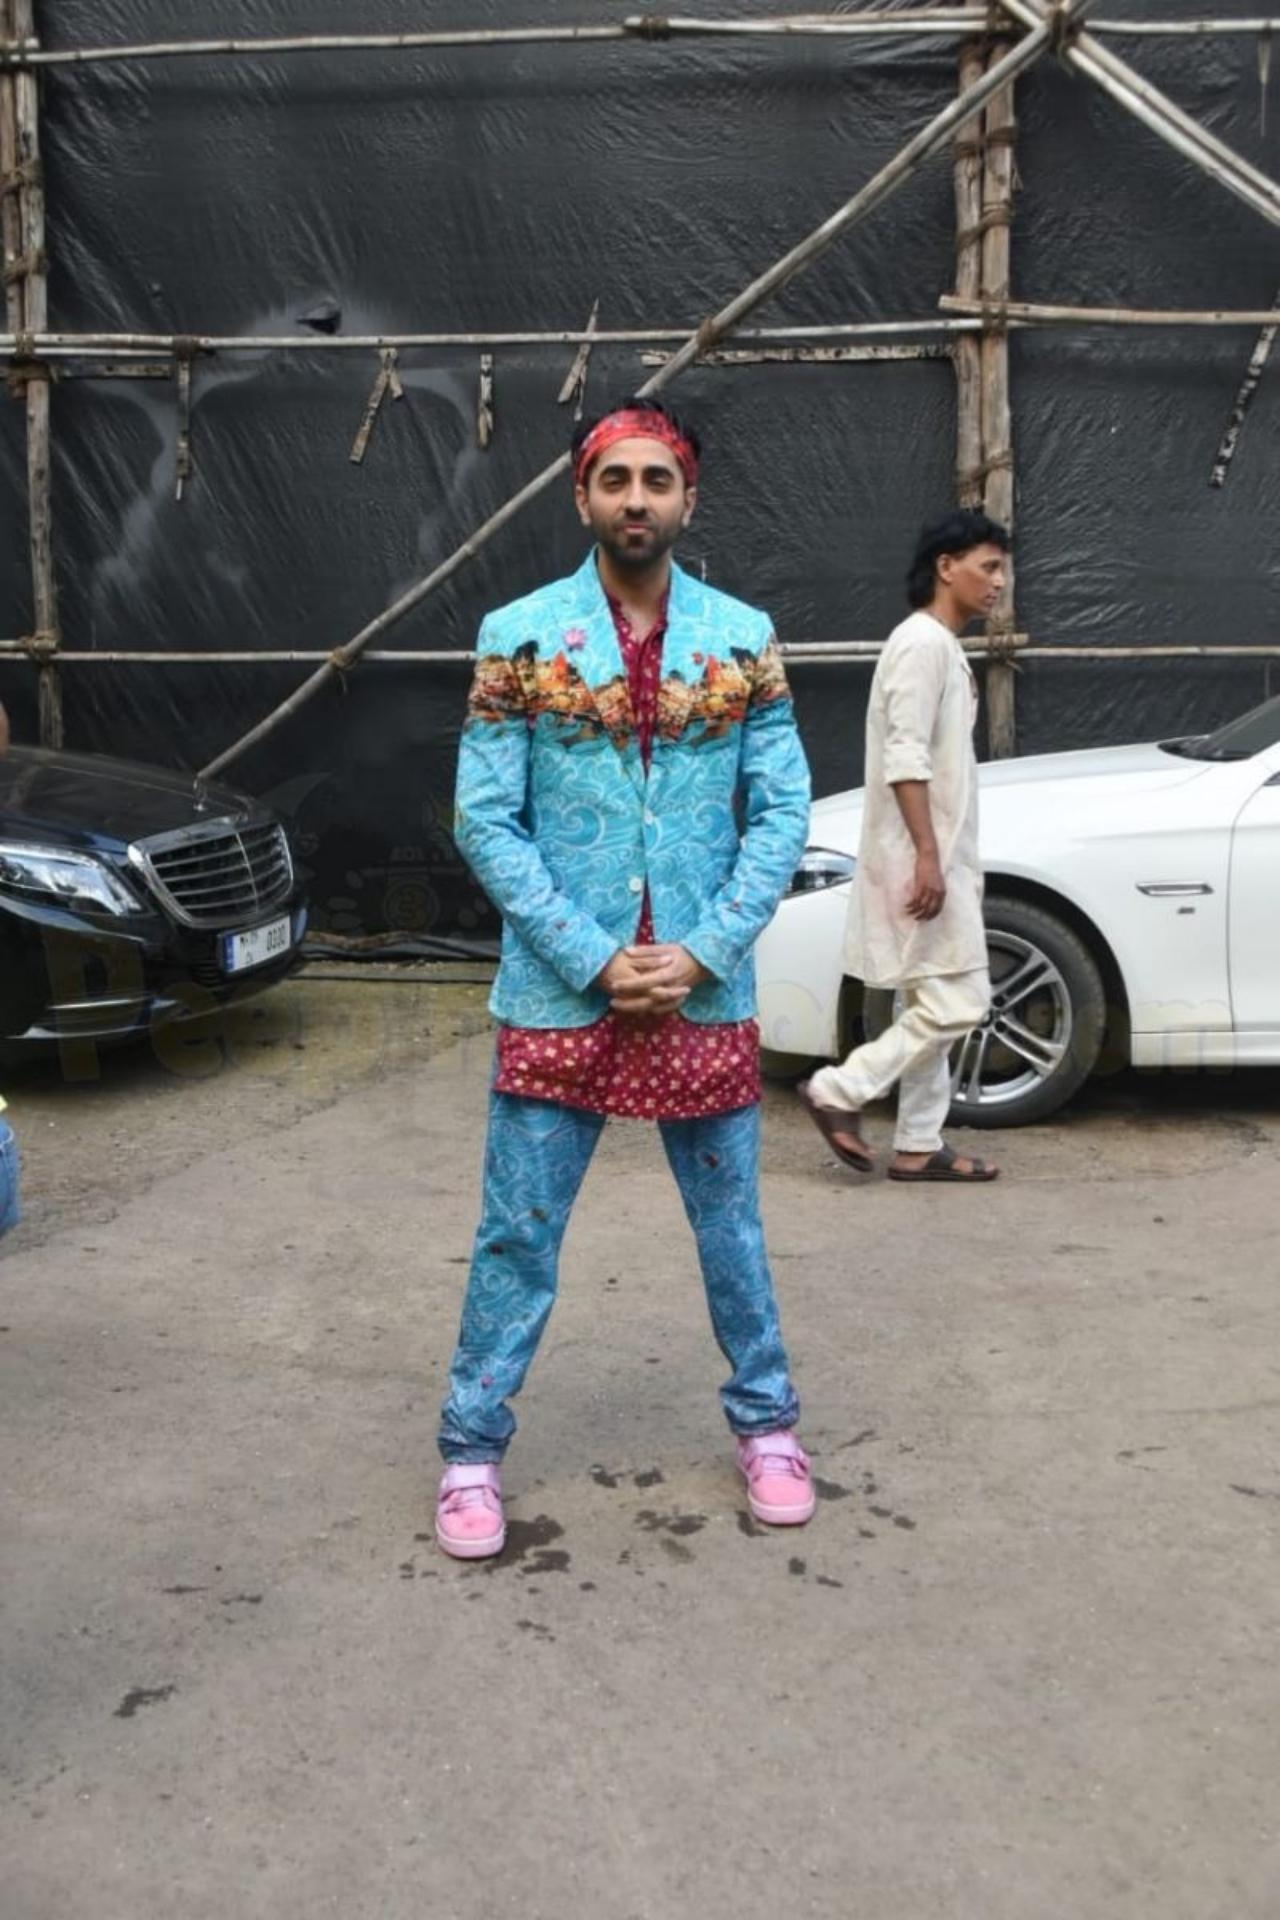 Ayushmann Khurrana has carved a niche for himself as a versatile actor. He fearlessly experiments with different looks and genres, reflecting his willingness to take risks even in fashion. Whether it's his quirky and unconventional choices on the red carpet or his effortlessly cool casual outfits, Ayushmann effortlessly adapts to various fashion trends, setting his fashion style apart from the rest.